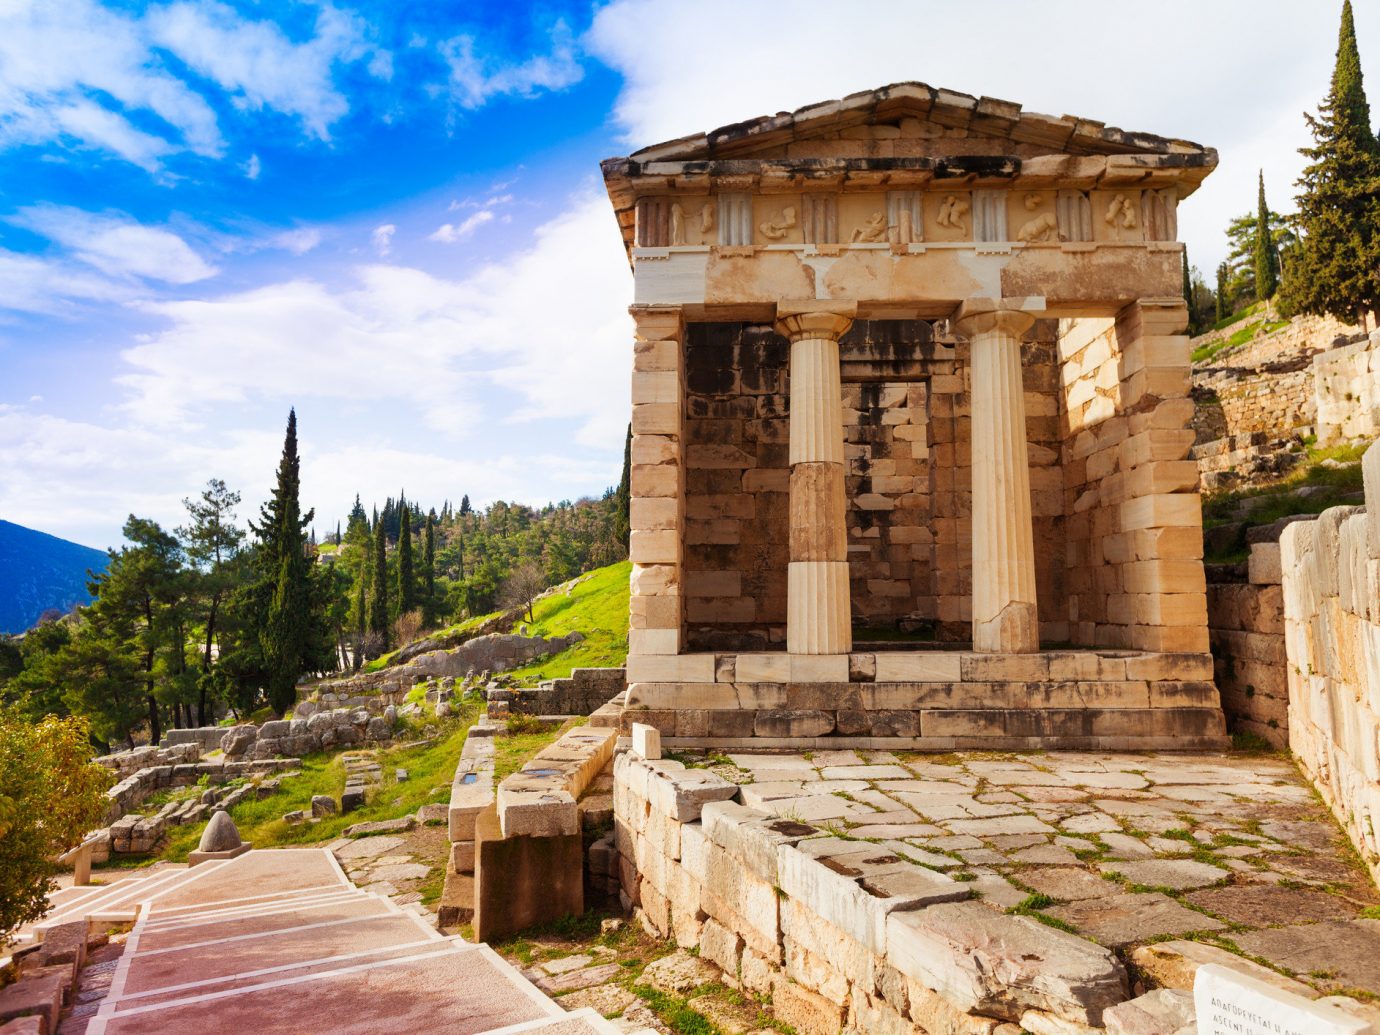 Arts + Culture Landmarks Trip Ideas sky outdoor historic site building archaeological site ancient history Ruins temple tourism tourist attraction history stone facade tree ancient greek temple estate ruin